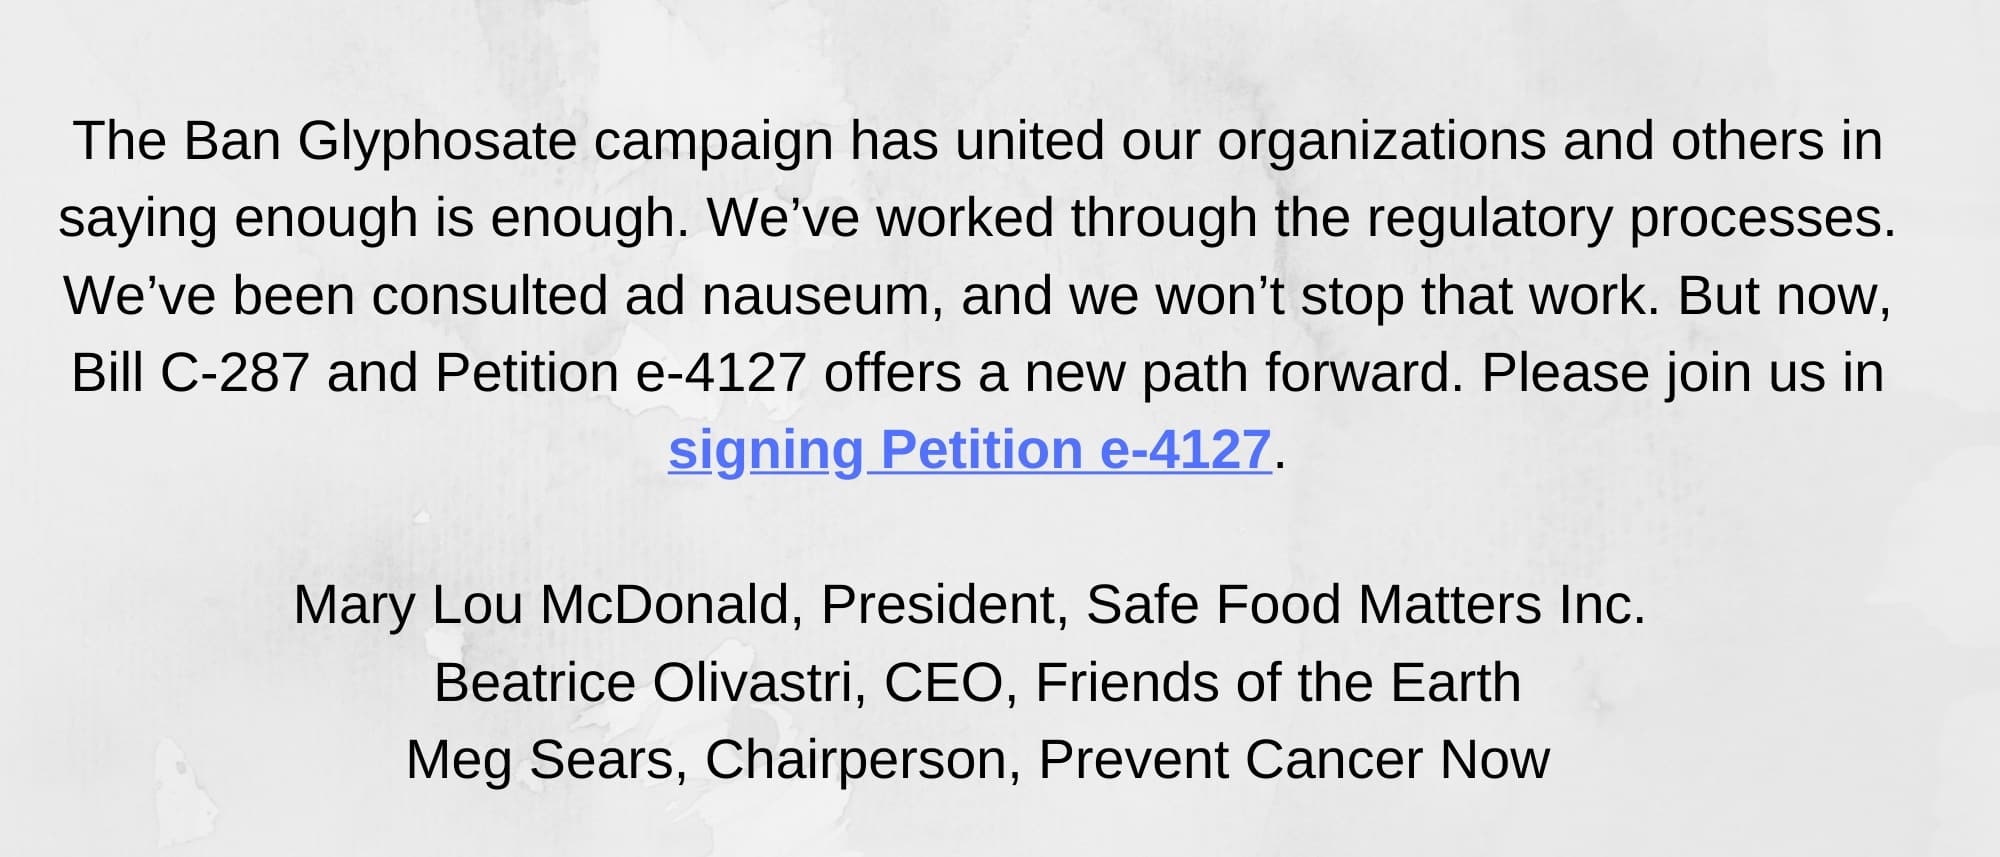 text box: The Ban Glyphosate campaign has united our organizations and others in saying enough is enough. We’ve worked through the regulatory processes. We’ve been consulted ad nauseum, and we won’t stop that work. But now, Bill C-287 and Petition e-4127 offers a new path forward. Please join us in signing Petition e-4127. Mary Lou McDonald, President, Safe Food Matters Inc. Beatrice Olivastri, CEO, Friends of the Earth Meg Sears, Chairperson, Prevent Cancer Now